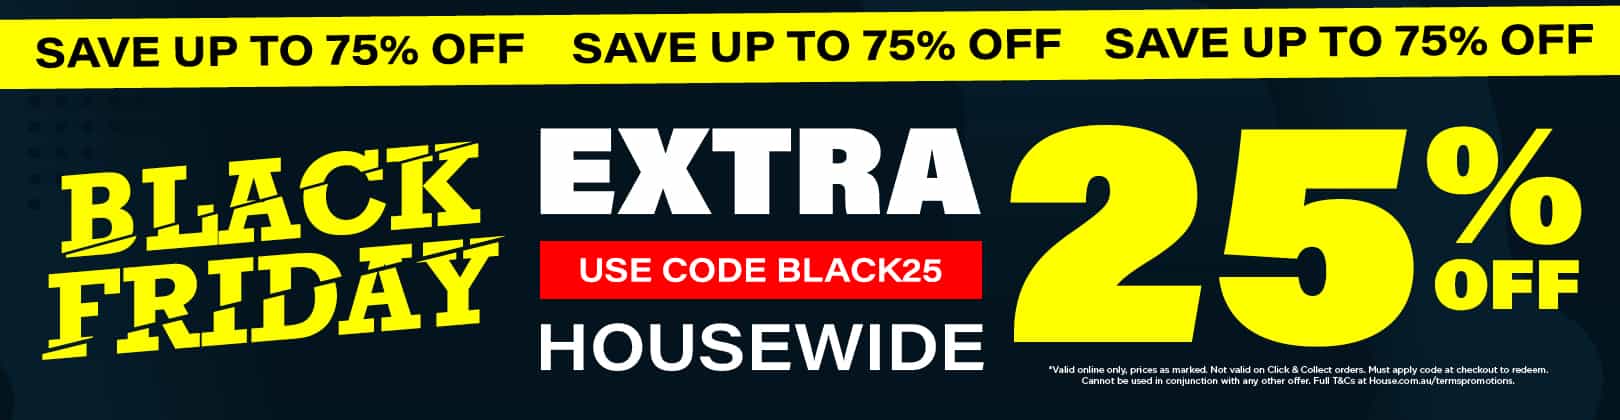 House Black Friday sale up to 75% OFF + extra 25% OFF with coupon. Save on cutlery, knives, & more